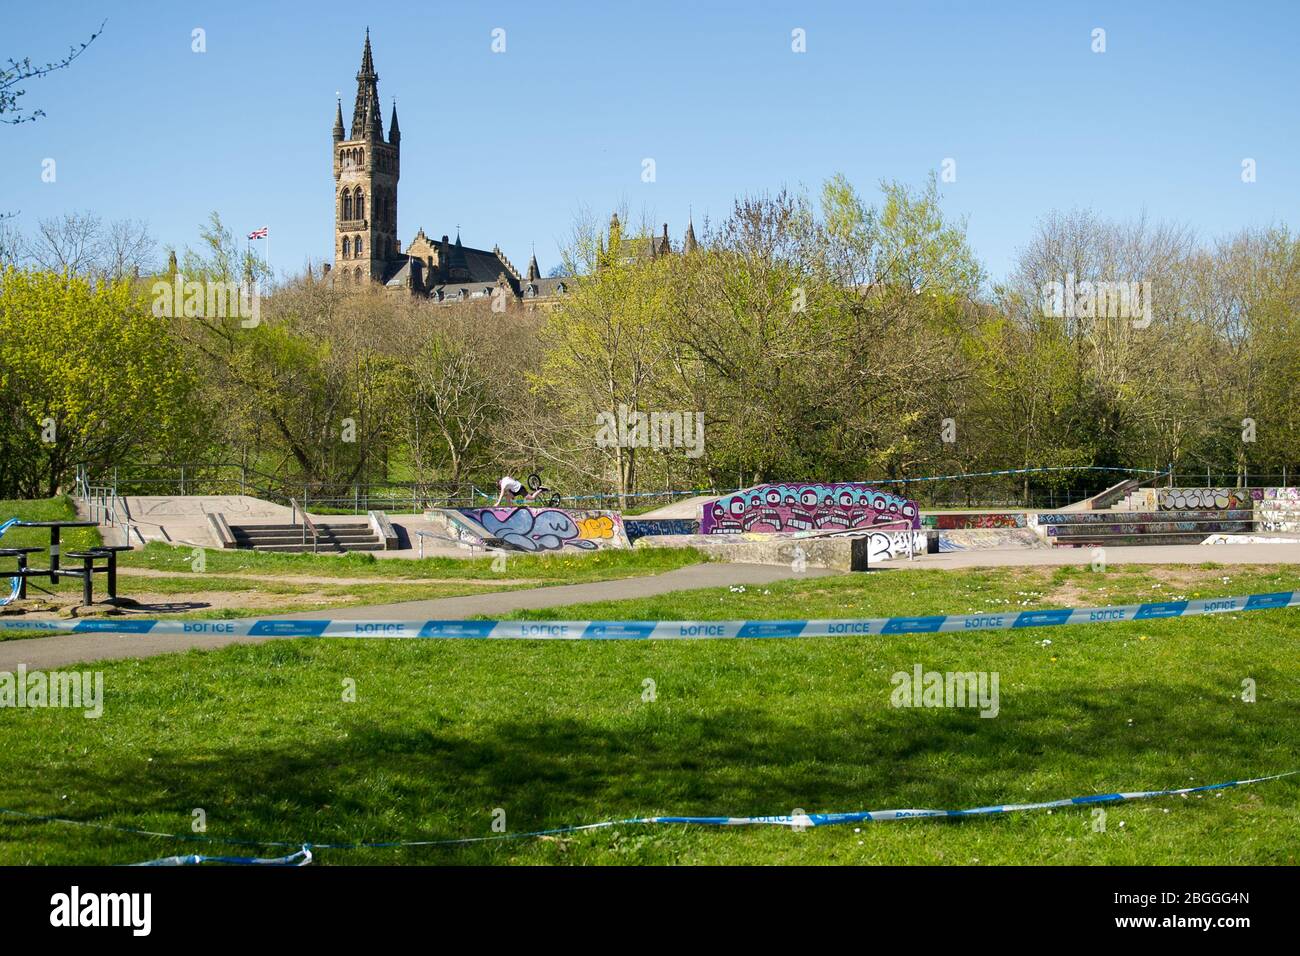 Glasgow, UK. 21st Apr, 2020. Pictured: Empty skate park which has been cordoned off with police tape. Note the biker in the background is crashing his bike. Scenes from Kelvingrove Park in Glasgow during the coronavirus (COVID-19) lockdown. Credit: Colin Fisher/Alamy Live News Stock Photo